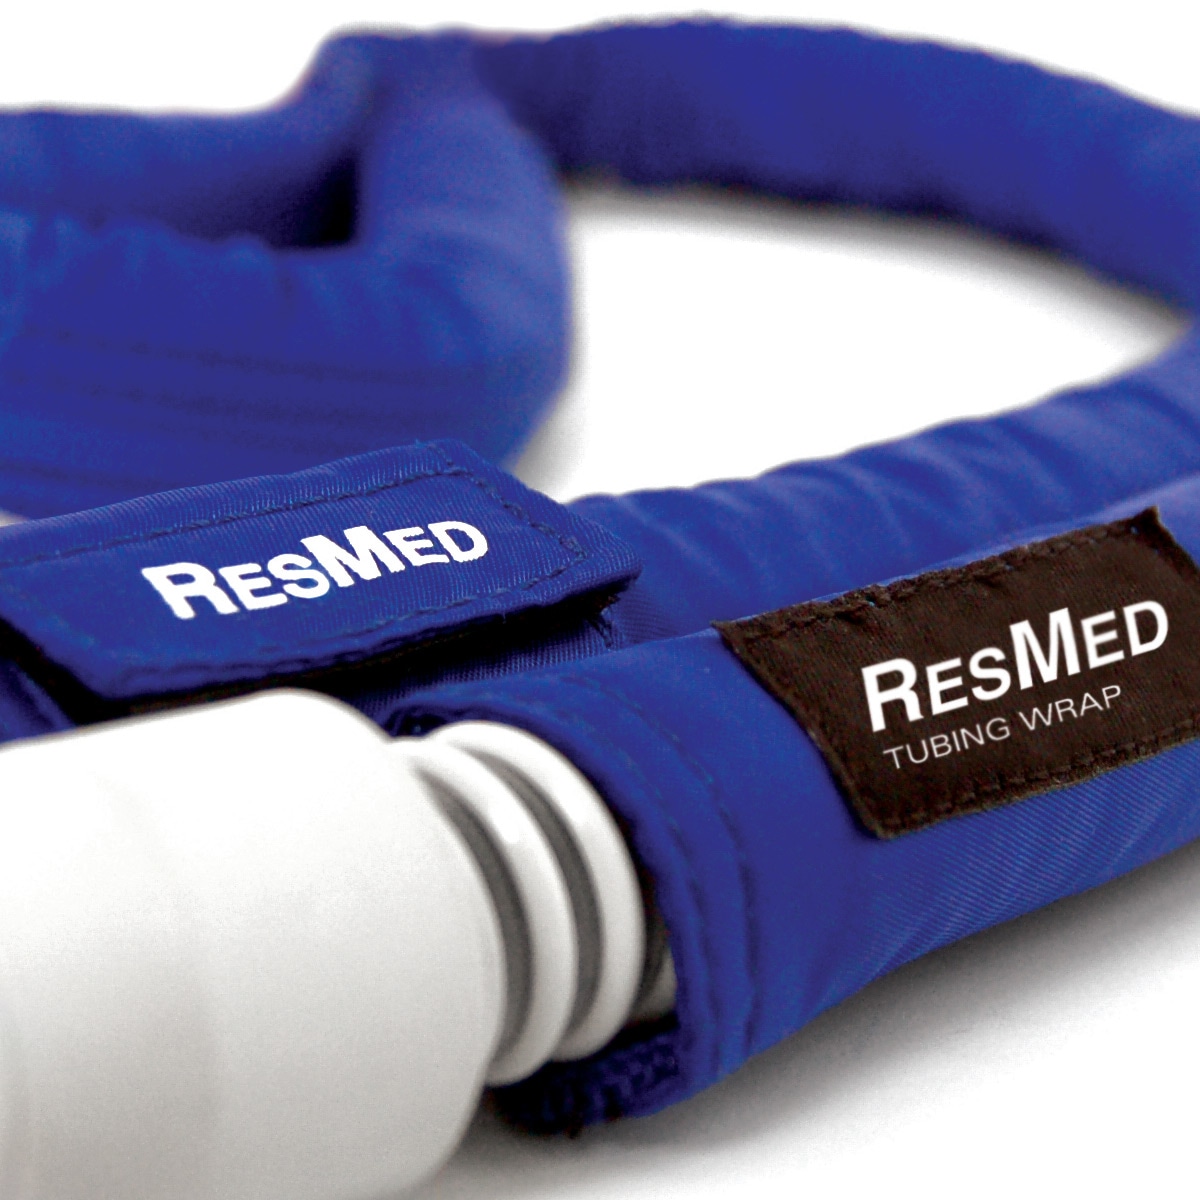 ResMed Blue Tubing Wrap CPAP Hose Cover : Ships Free